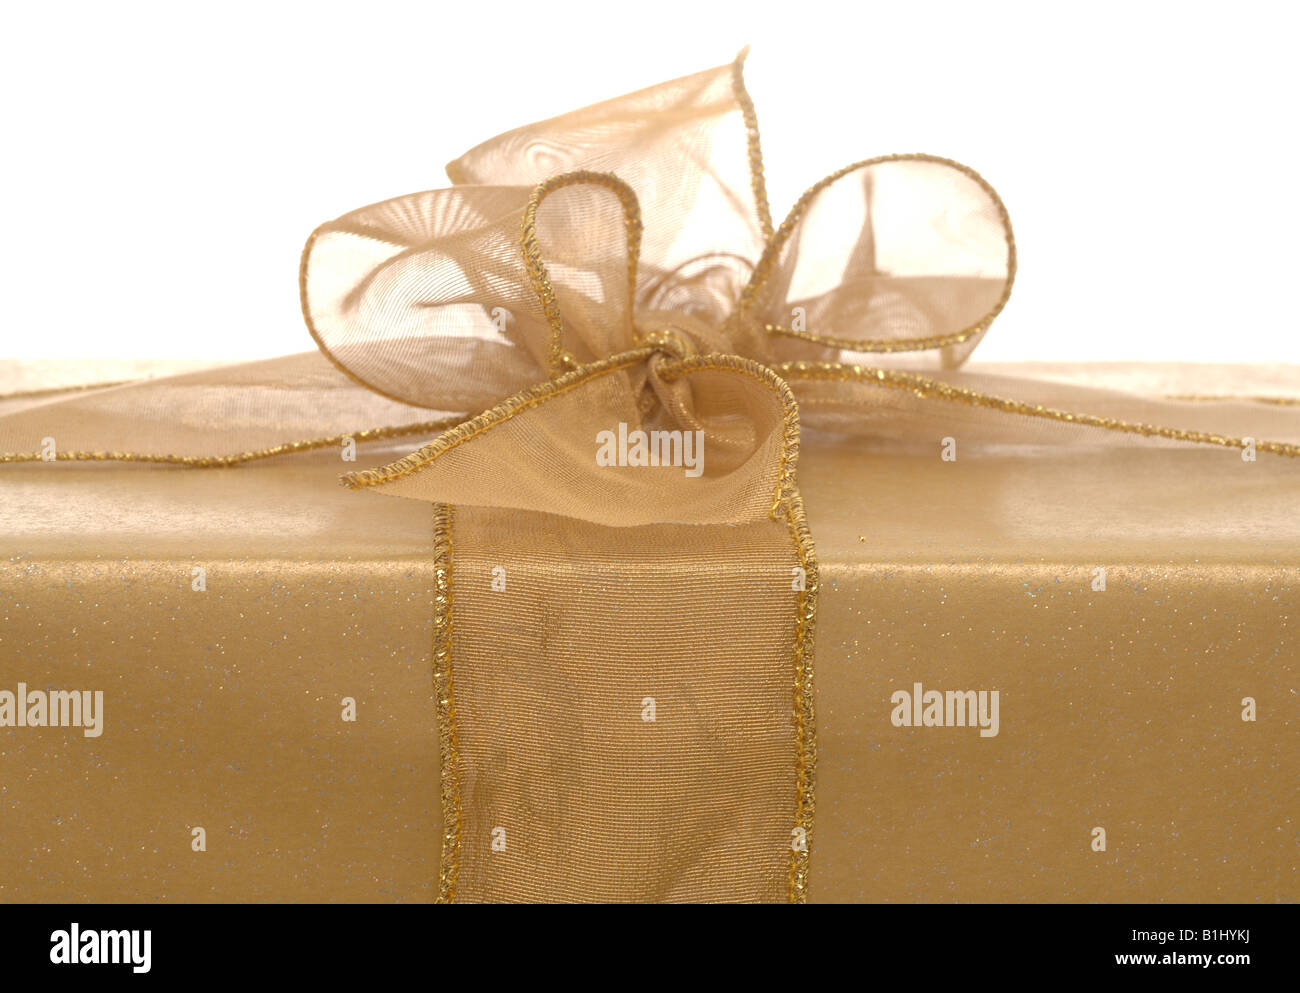 Gold gift Stock Photo